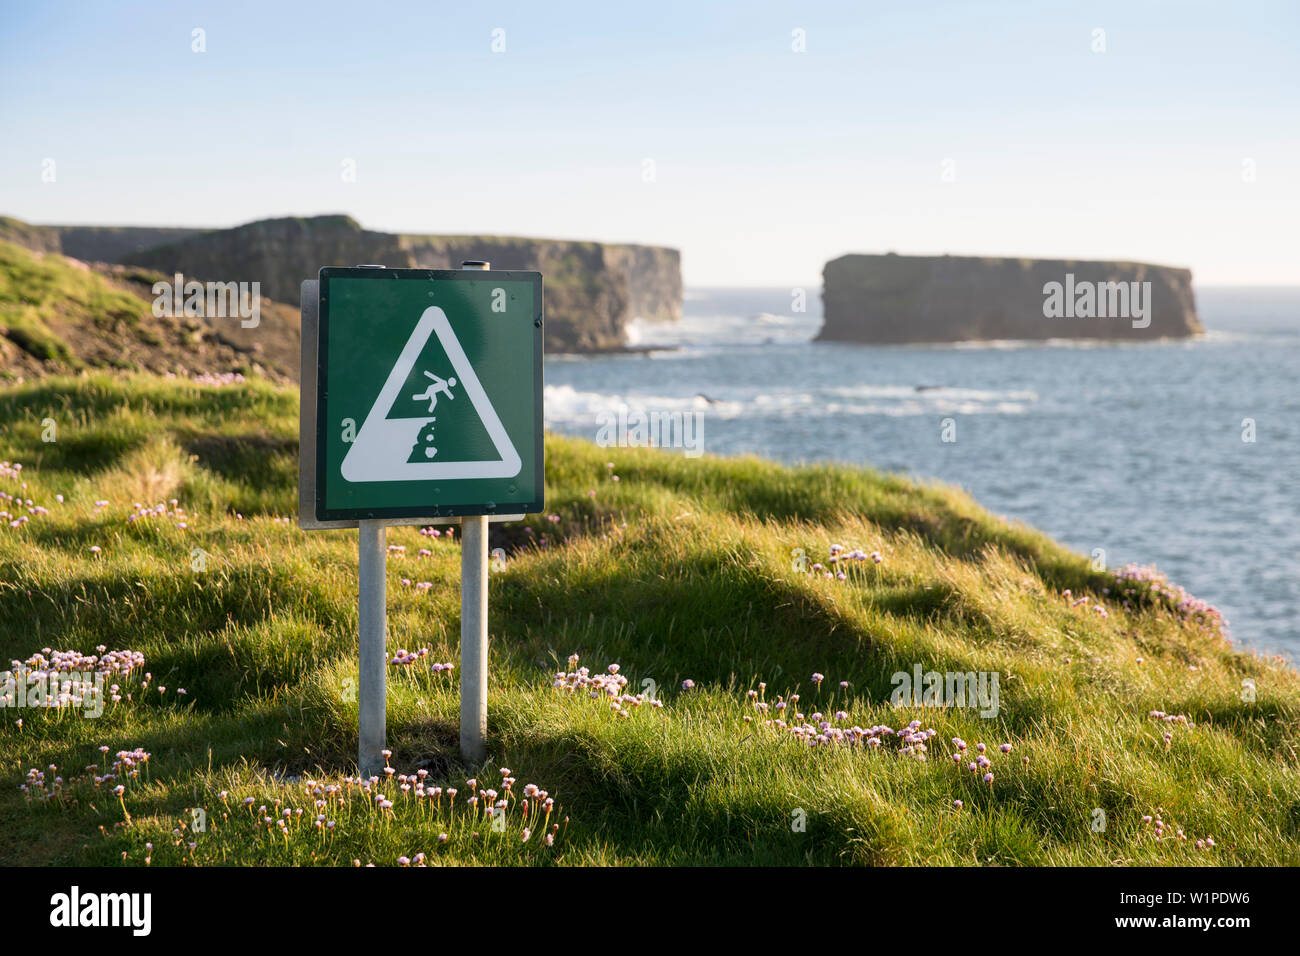 Danger! The edge of the cliff is not secured by fences or walls , and this sign warns walkers to watch their step, Kilkee, County Clare, Ireland, Euro Stock Photo